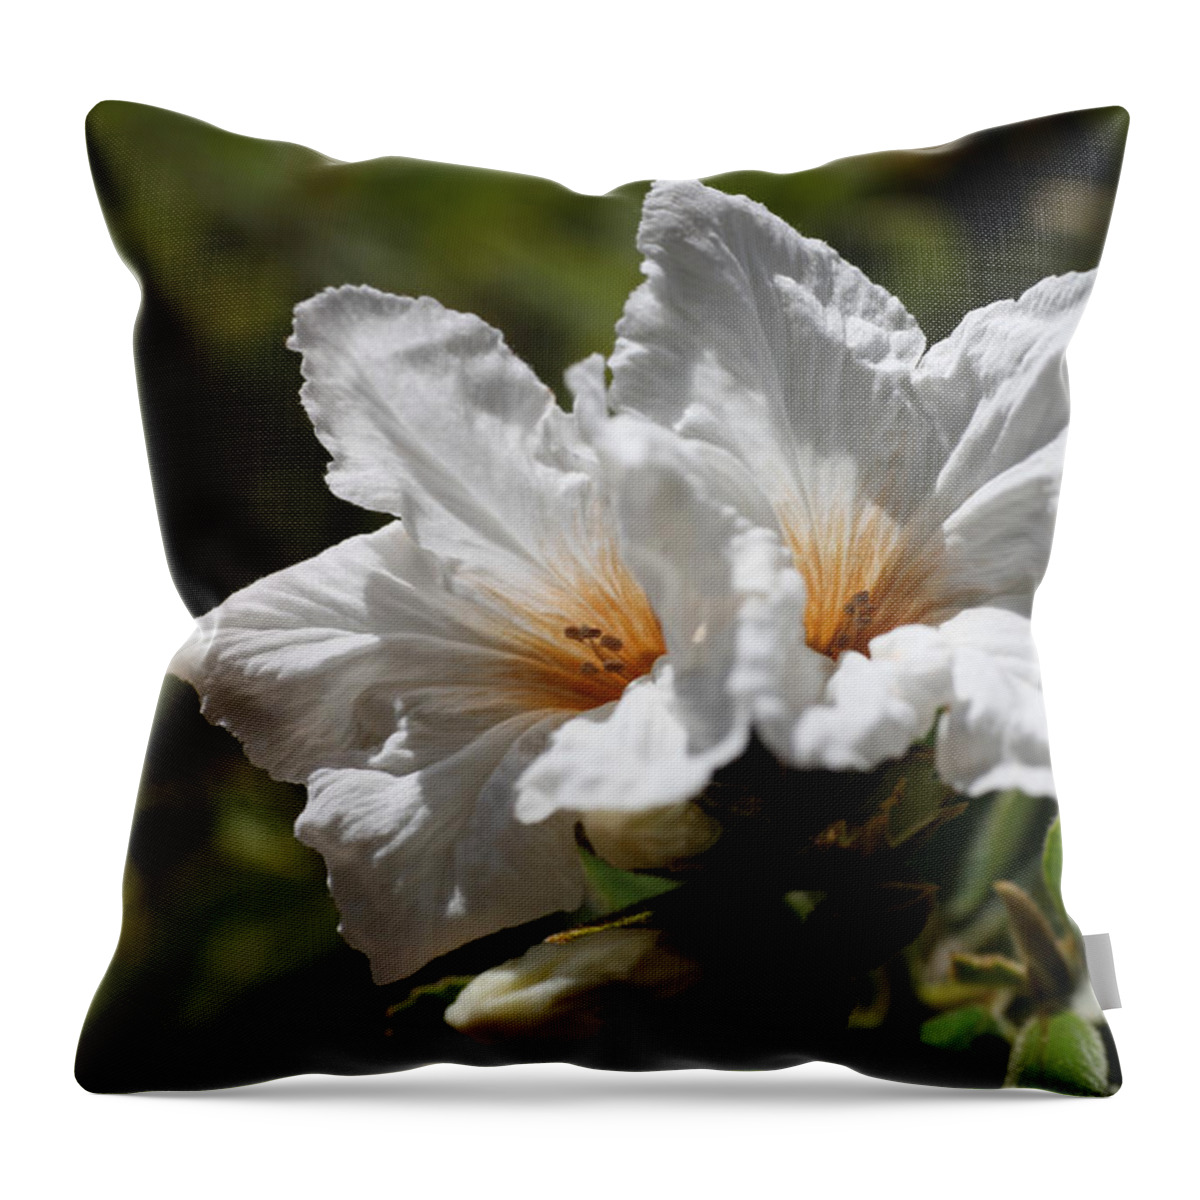 Glorious Throw Pillow featuring the photograph Glorious White Desert Flowers by Tammy Pool